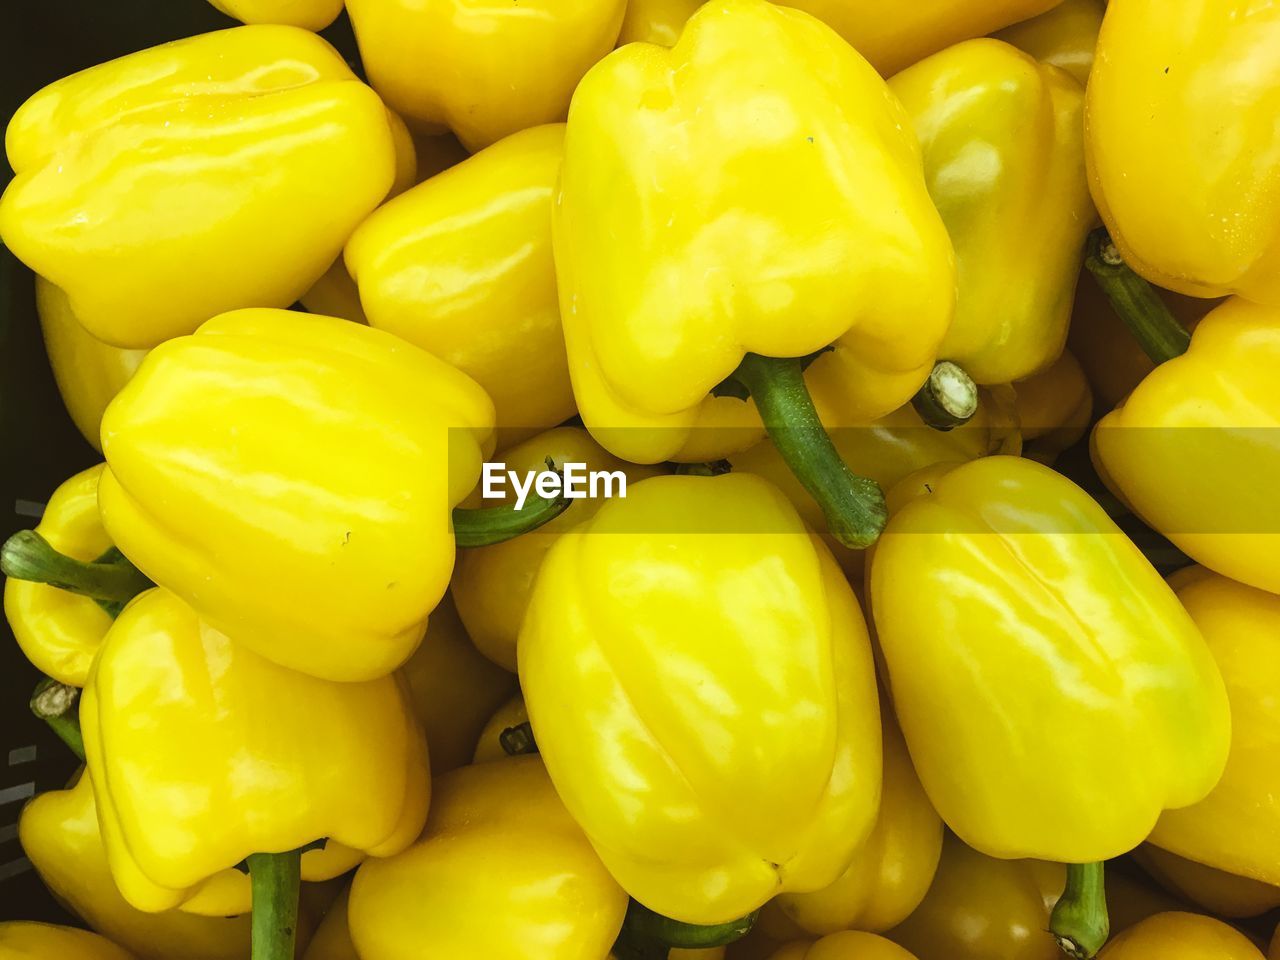 FULL FRAME SHOT OF YELLOW BELL PEPPERS FOR SALE